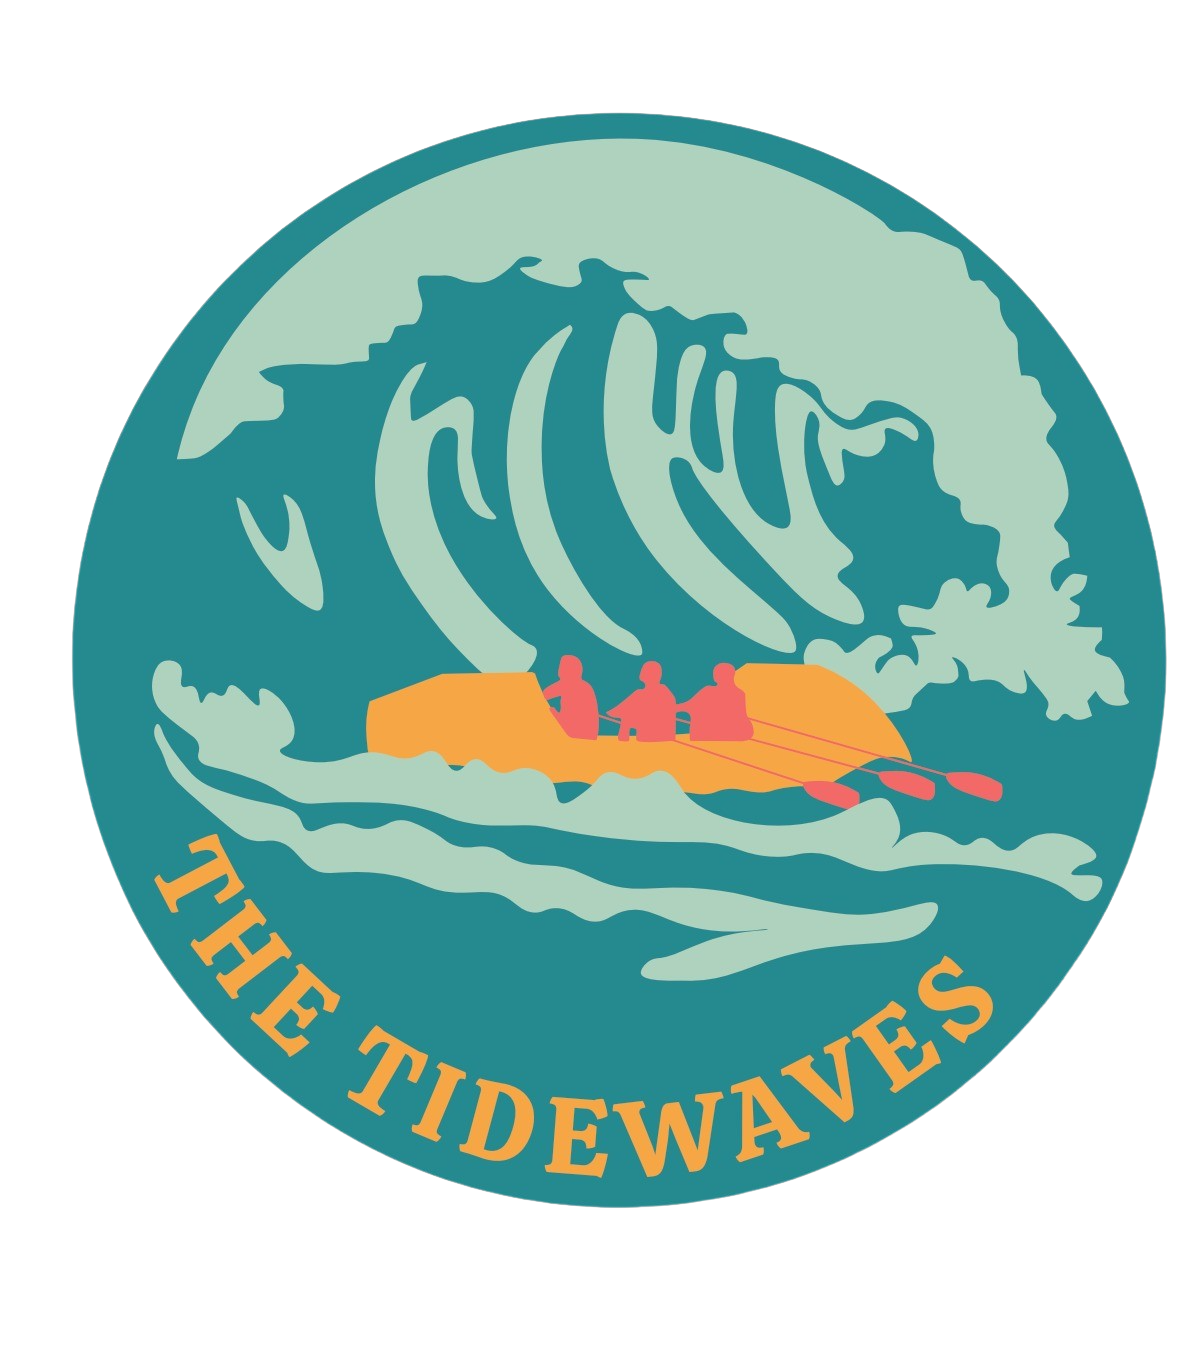 The Tidewaves